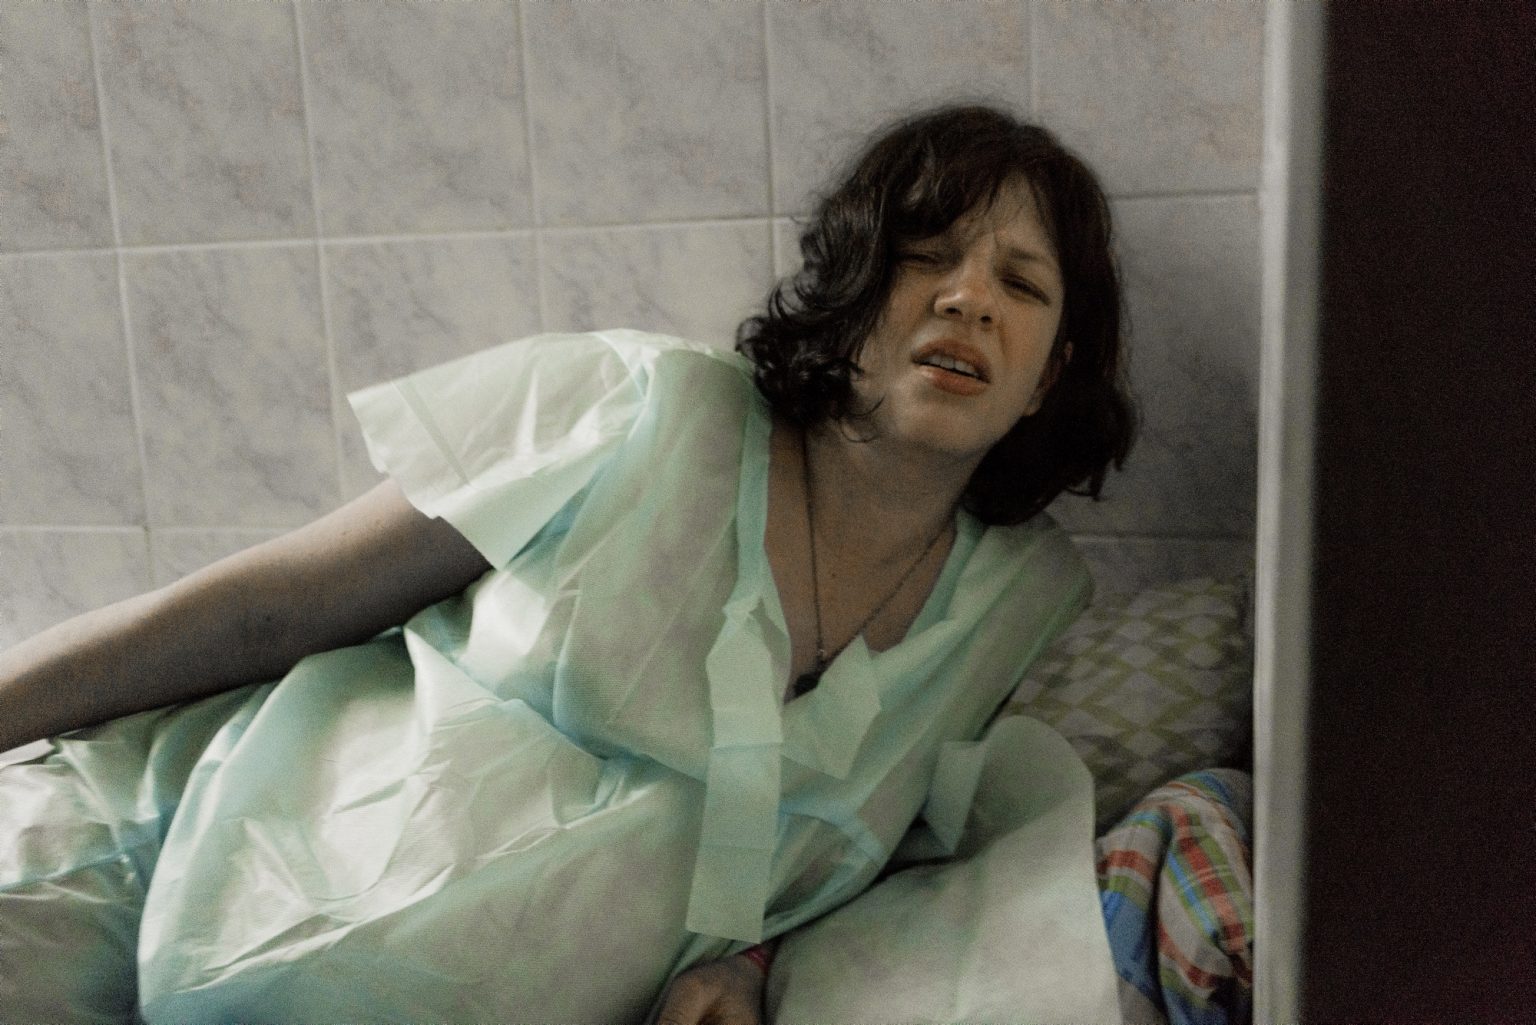 UKRAINE, Kyiv. March 02, 2022 - Anna (37) due to deliver in a maternity hospital's basement used as a bomb shelte in Kyiv.